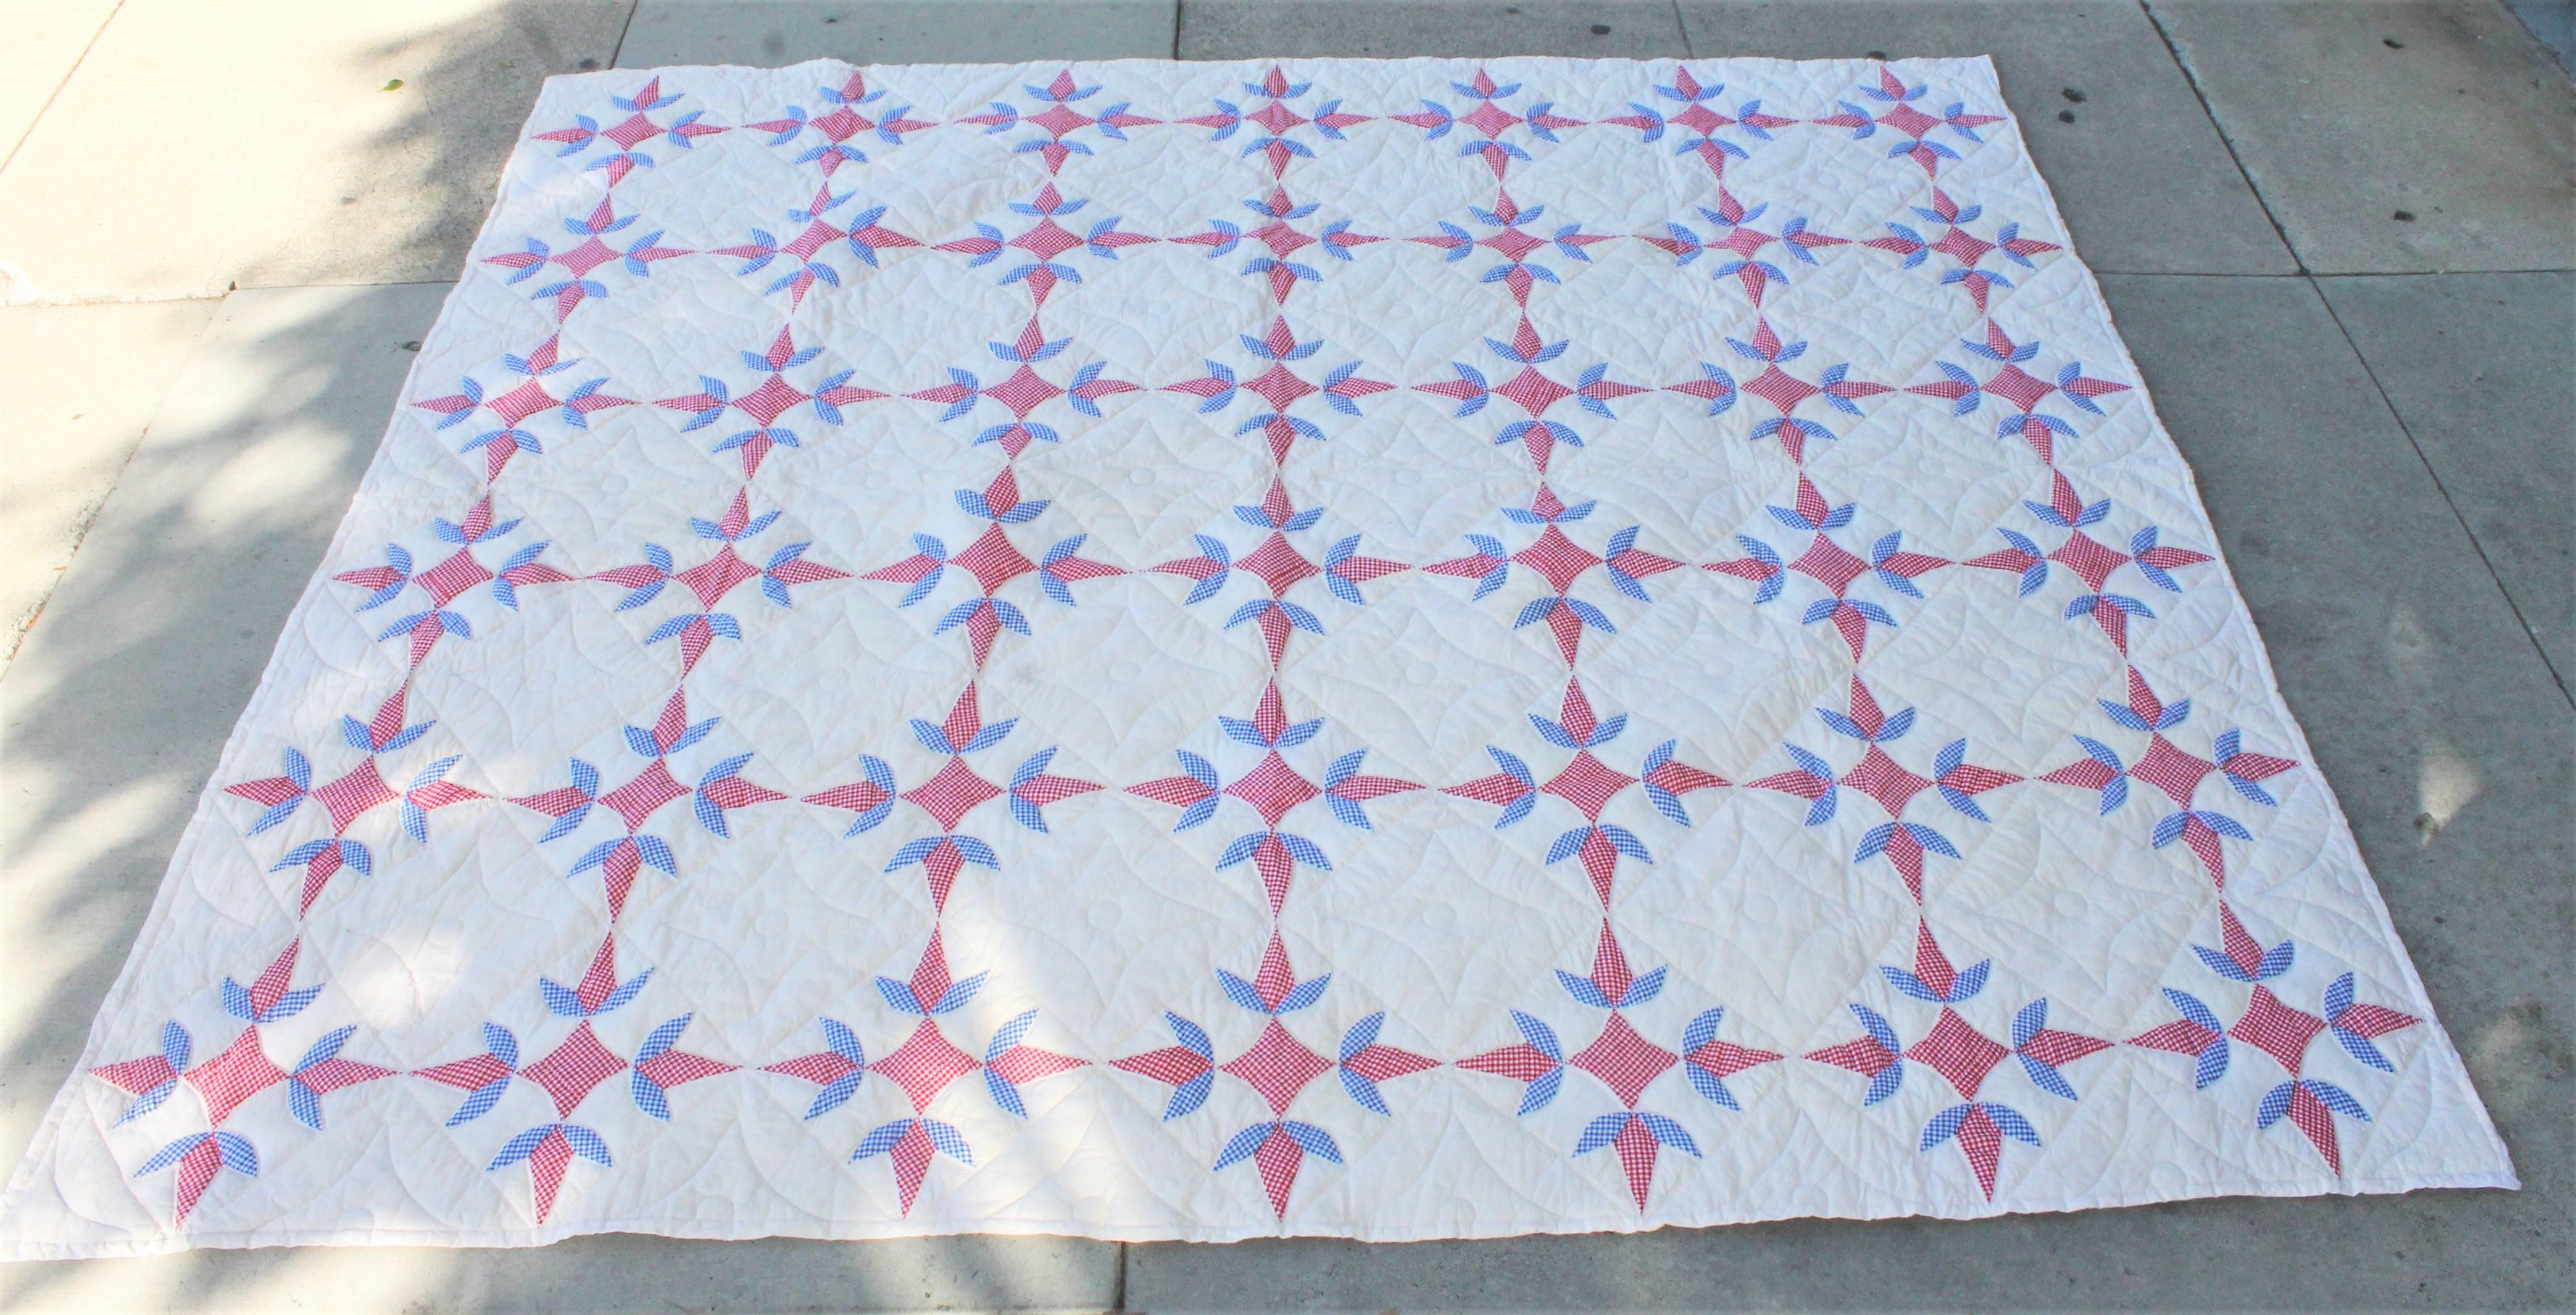 This fun red, white and blue geometric quilt is in fine condition and a very good size. Will fit a queen or king bed.